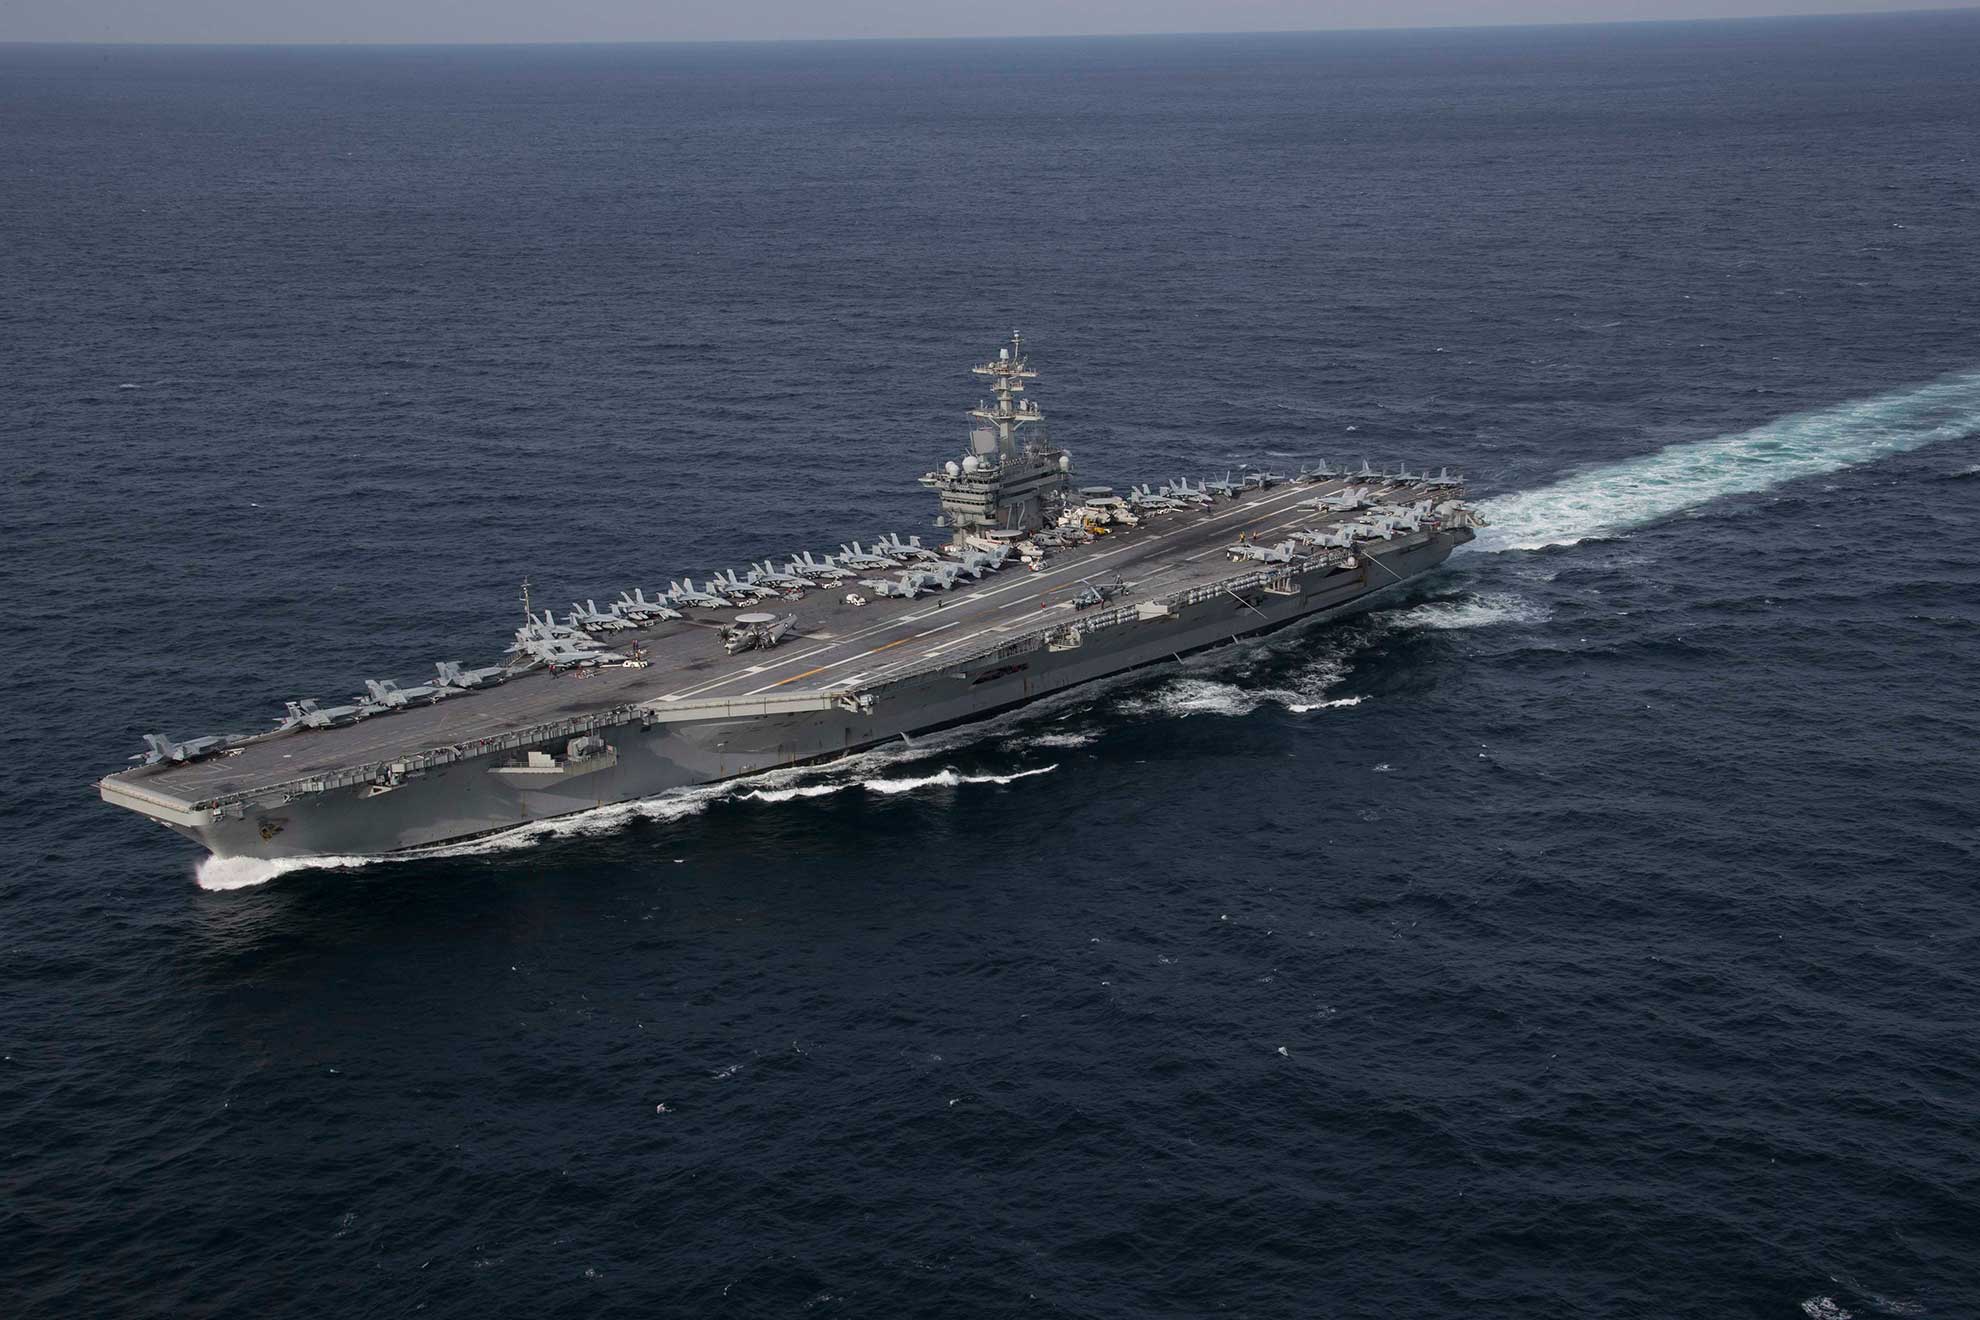 Atlantic Ocean (Jan. 30, 2019) The Nimitz-class aircraft carrier USS Abraham Lincoln (CVN 72) transits the Atlantic Ocean during a strait transit exercise. Abraham Lincoln is underway conducting a composite training unit exercise with Carrier Strike Group (CSG) 12. The components of CSG 12 embody a "team-of-teams" concept, combining advanced surface, air and systems assets to create and sustain operational capability. This enables them to prepare for and conduct global operations, have effective and lasting command and control, and demonstrate dedication and commitment to becoming the strongest warfighting force for the Navy and the nation -- U.S. Navy photo by MCS3 Clint Davis. -